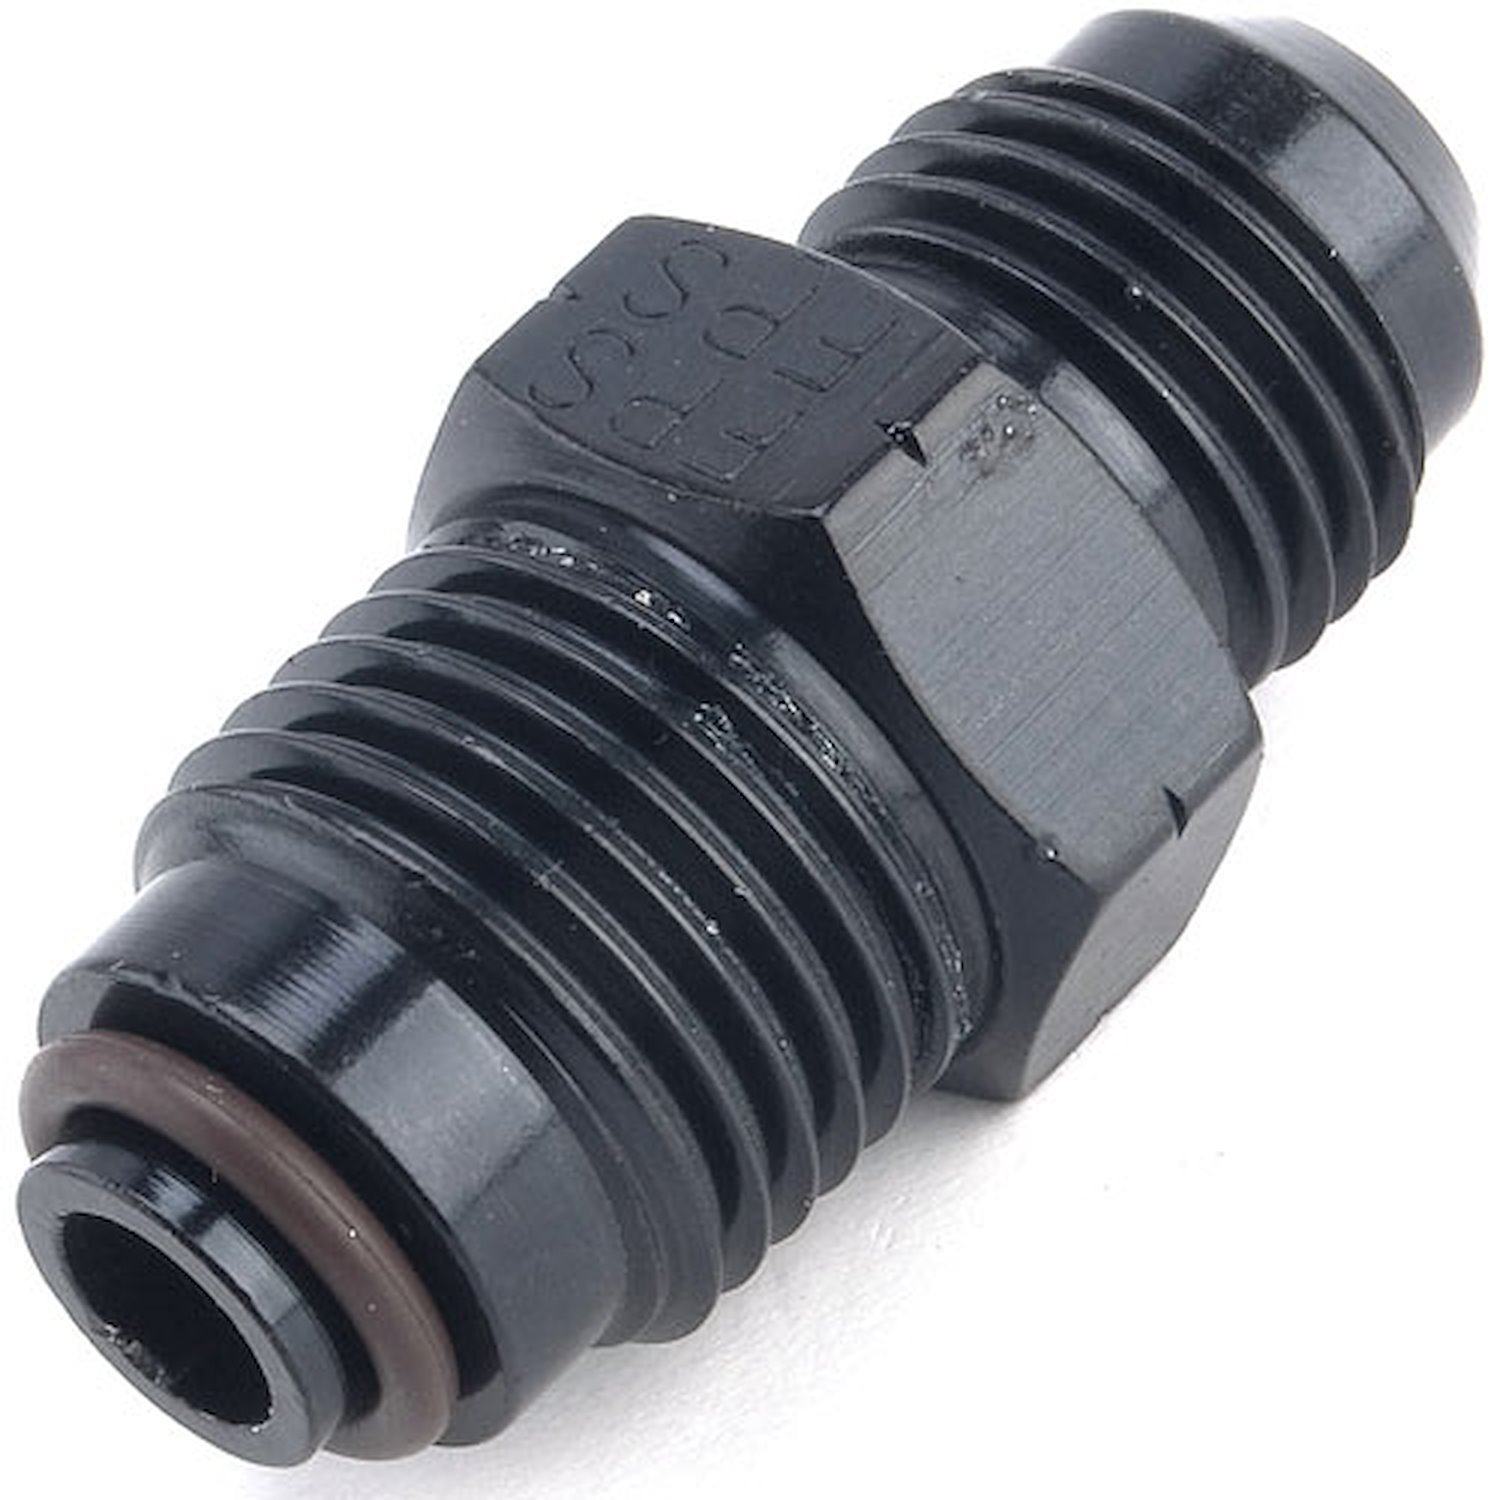 AN to Fuel Injection Adapter Fitting for GM TBI [-6 AN Male to 16mm x 1.5 Male with O-Ring]